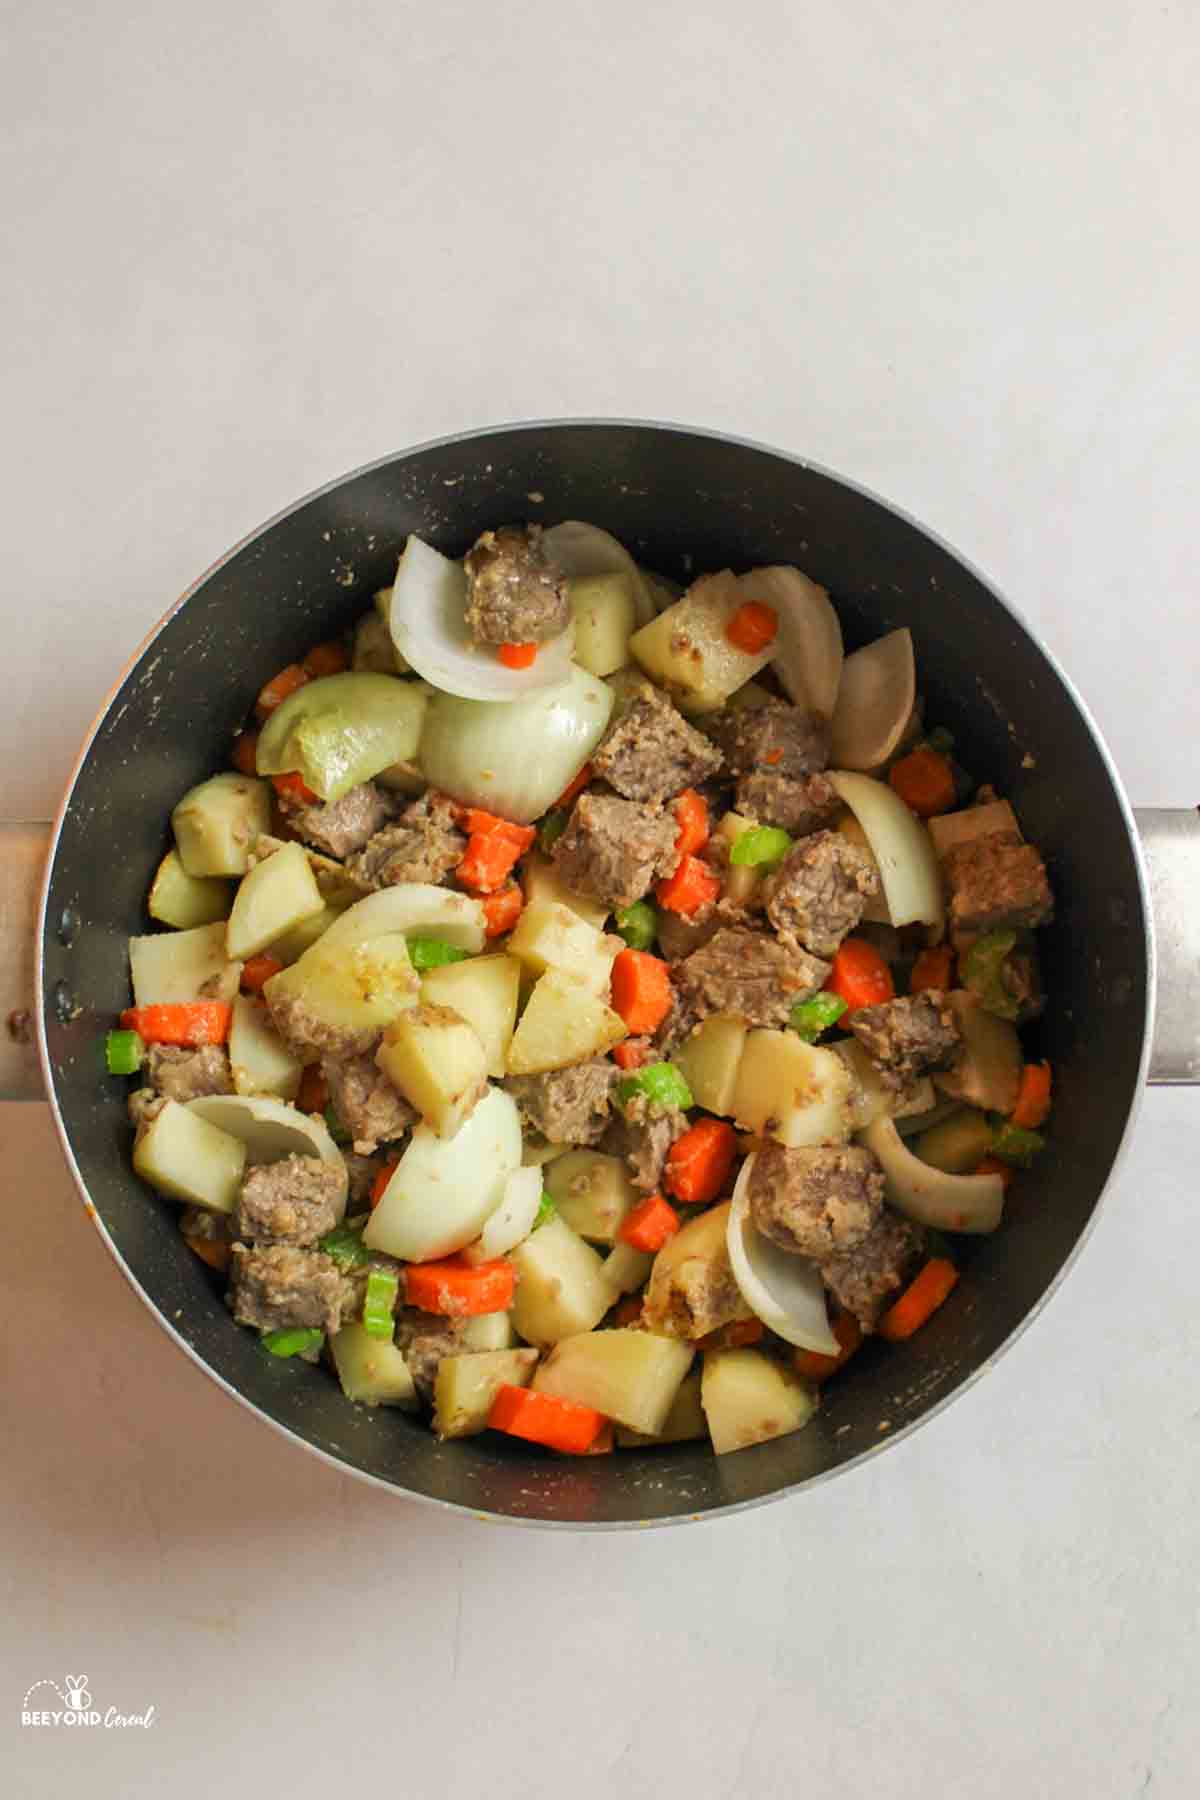 cooked vegies and beef in a large pot